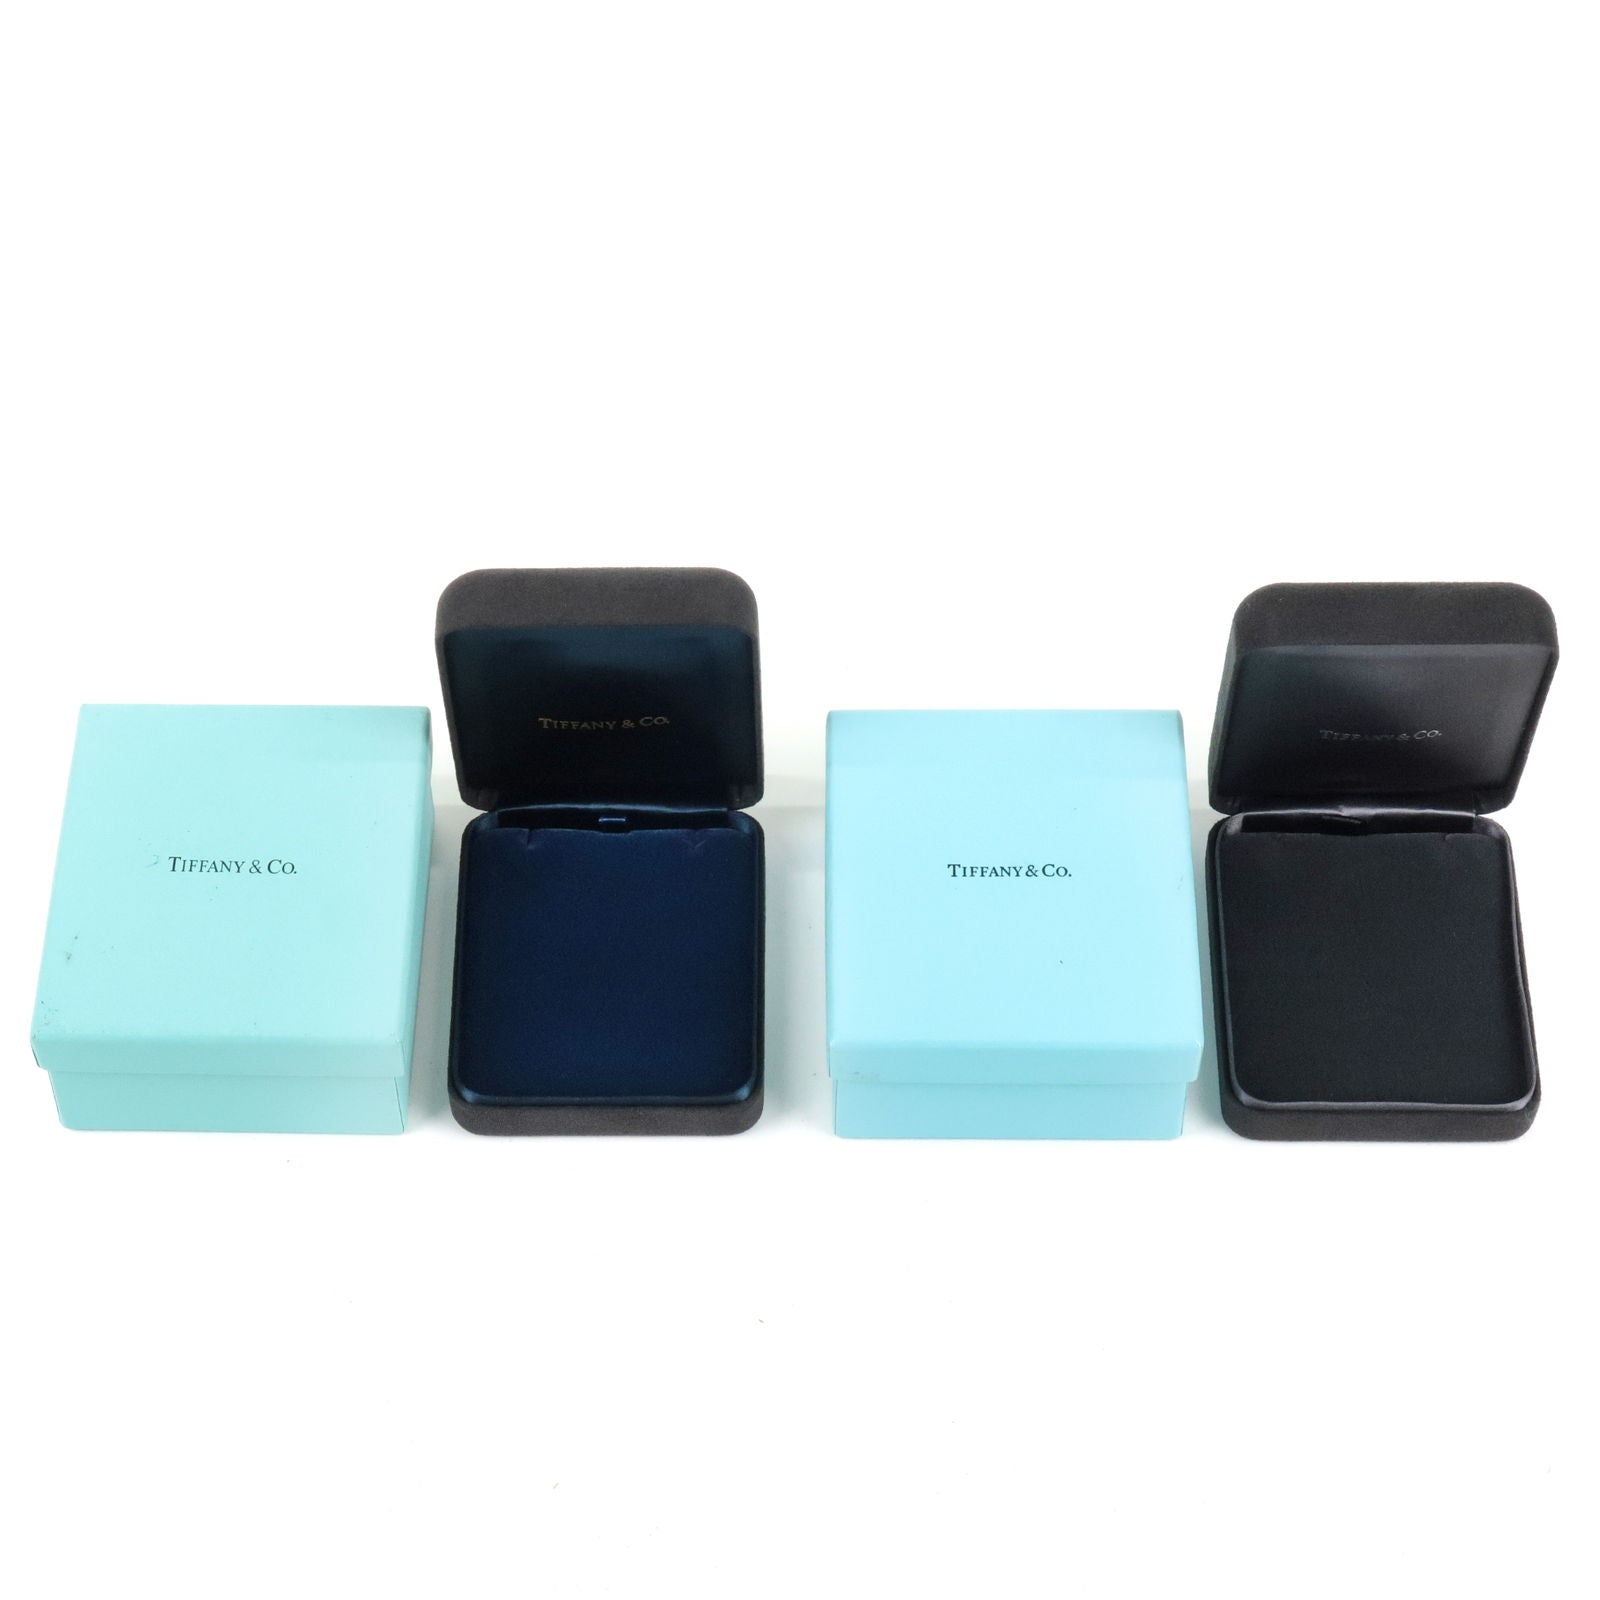 Tiffany&Co.-Set-of-2-Jewelry-Box-For-Necklace-Tiffany-Blue